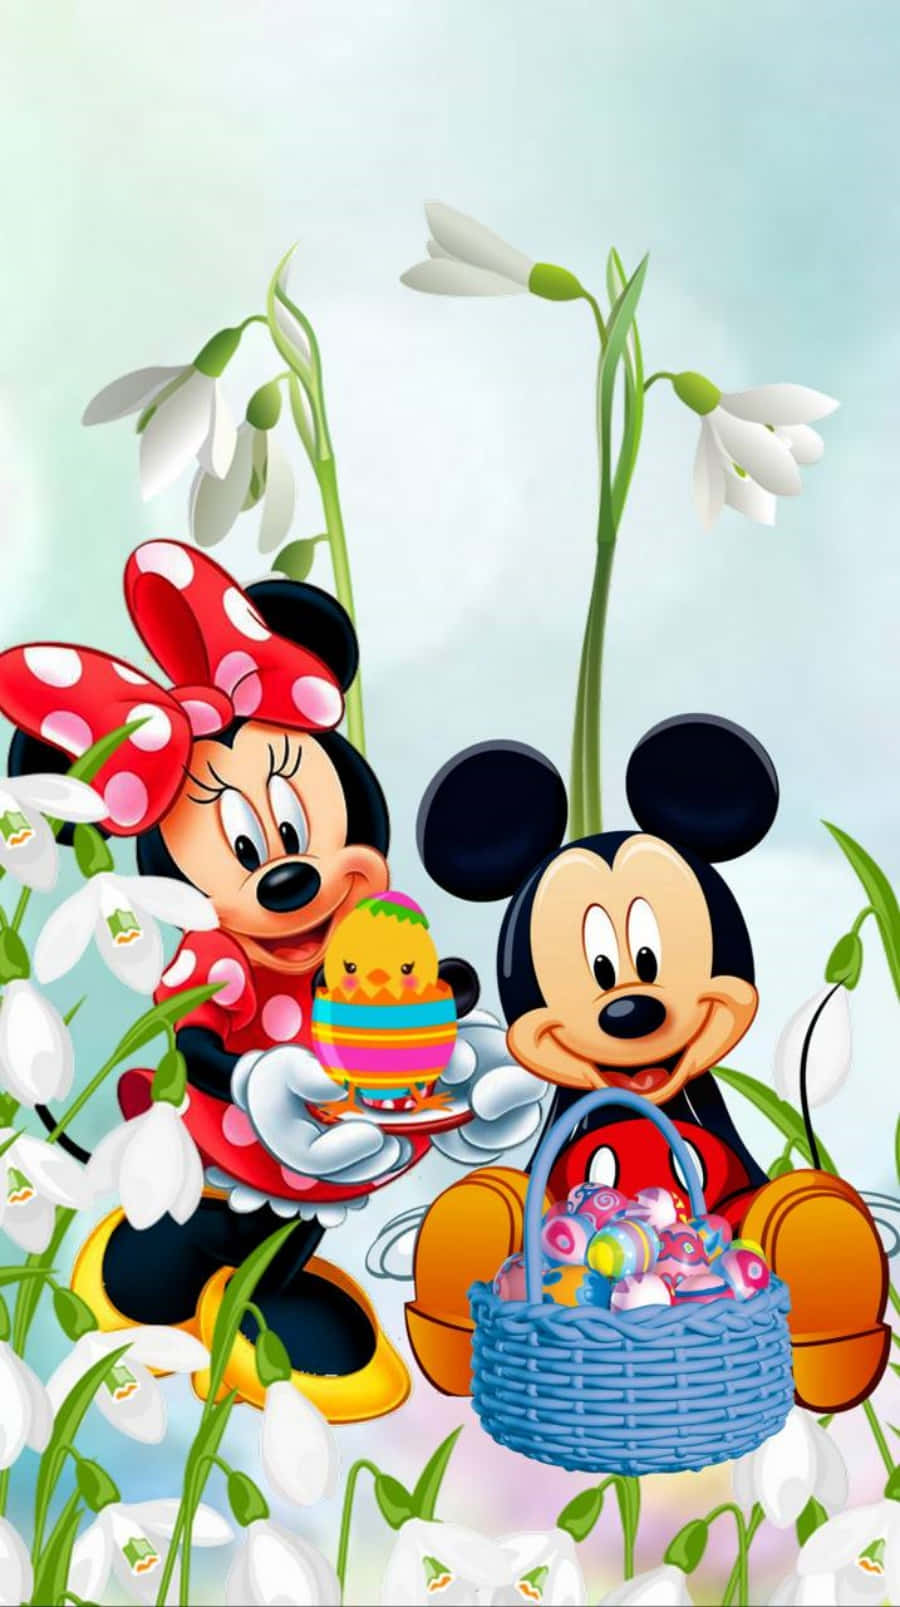 Disney Easter Collecting Eggs Wallpaper